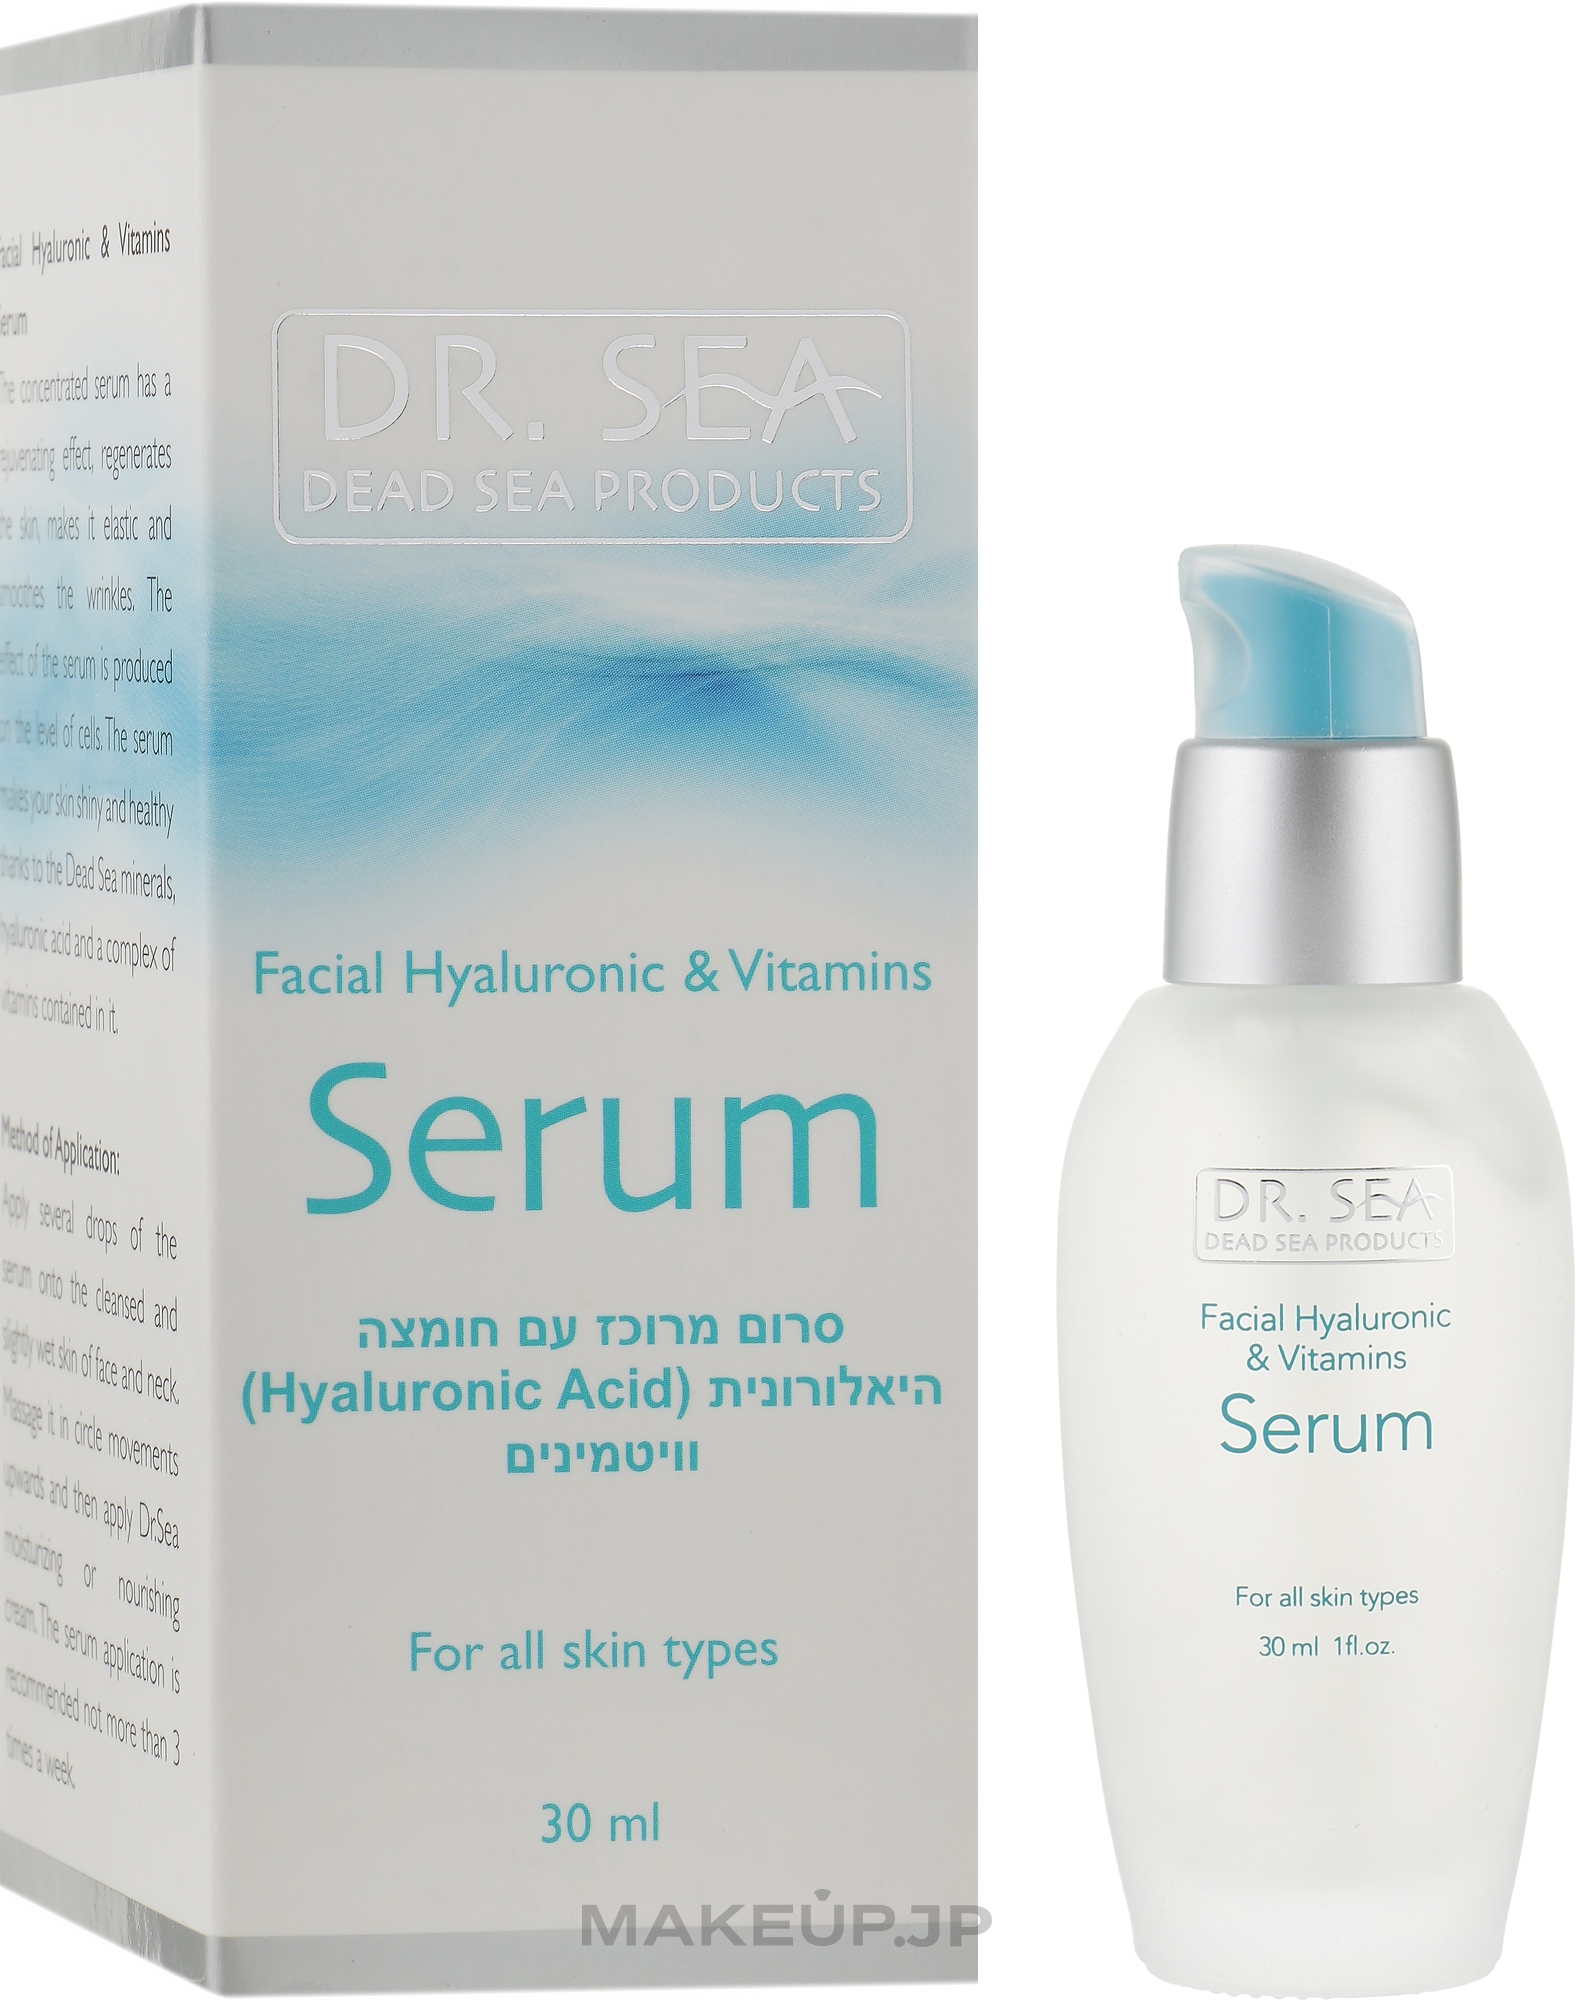 Face Serum with Hyaluronic Acid and Vitamins - Dr. Sea Facial Hyaluronic & Vitamins Serum — photo 30 ml